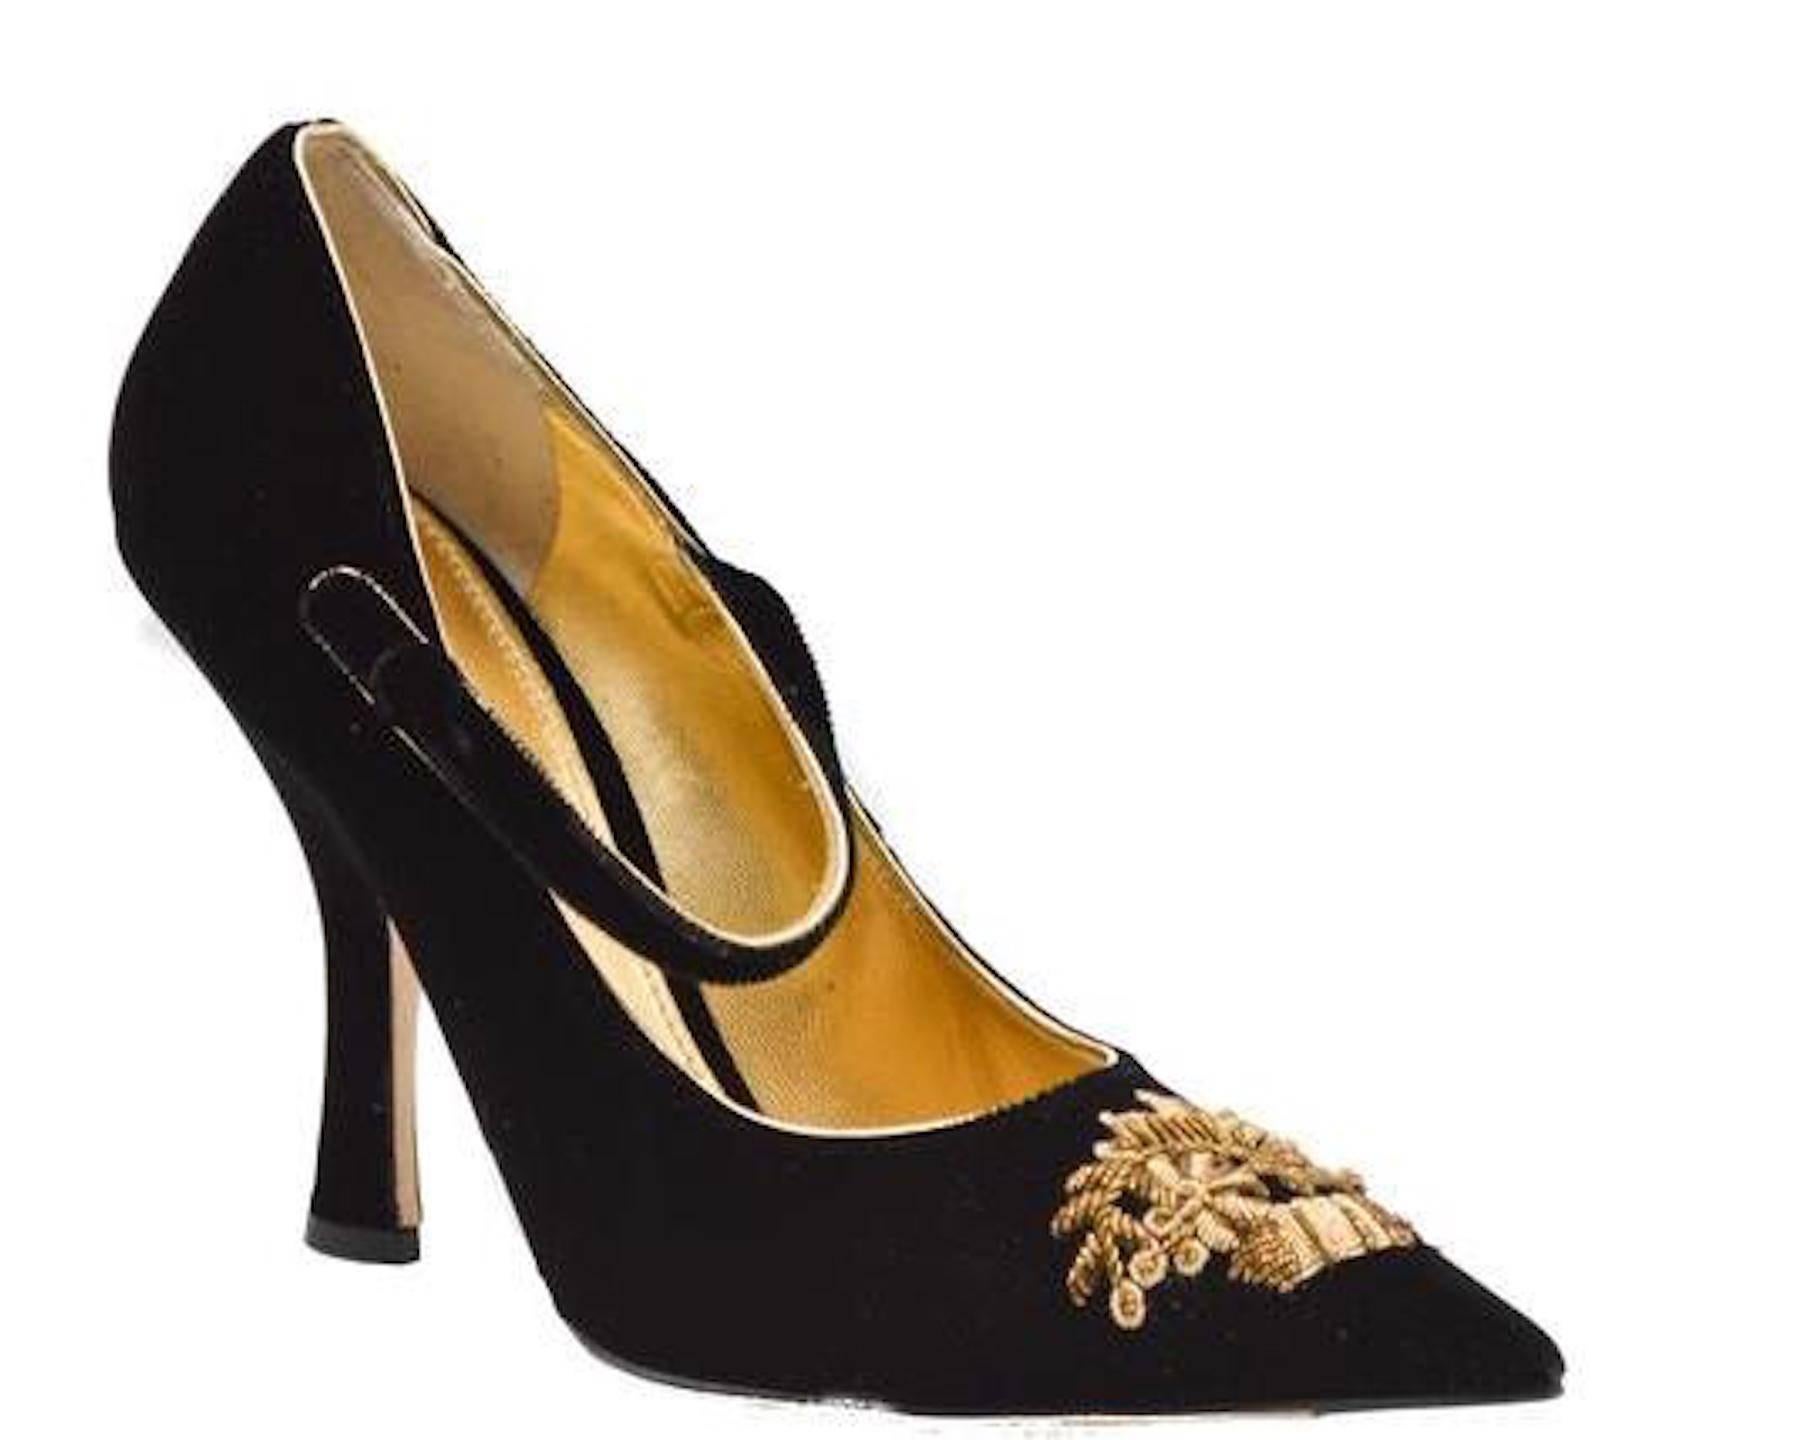 NEW! Dolce & Gabbana Runway Black Gold Evening Mary Jane Heels in Box For Sale 1